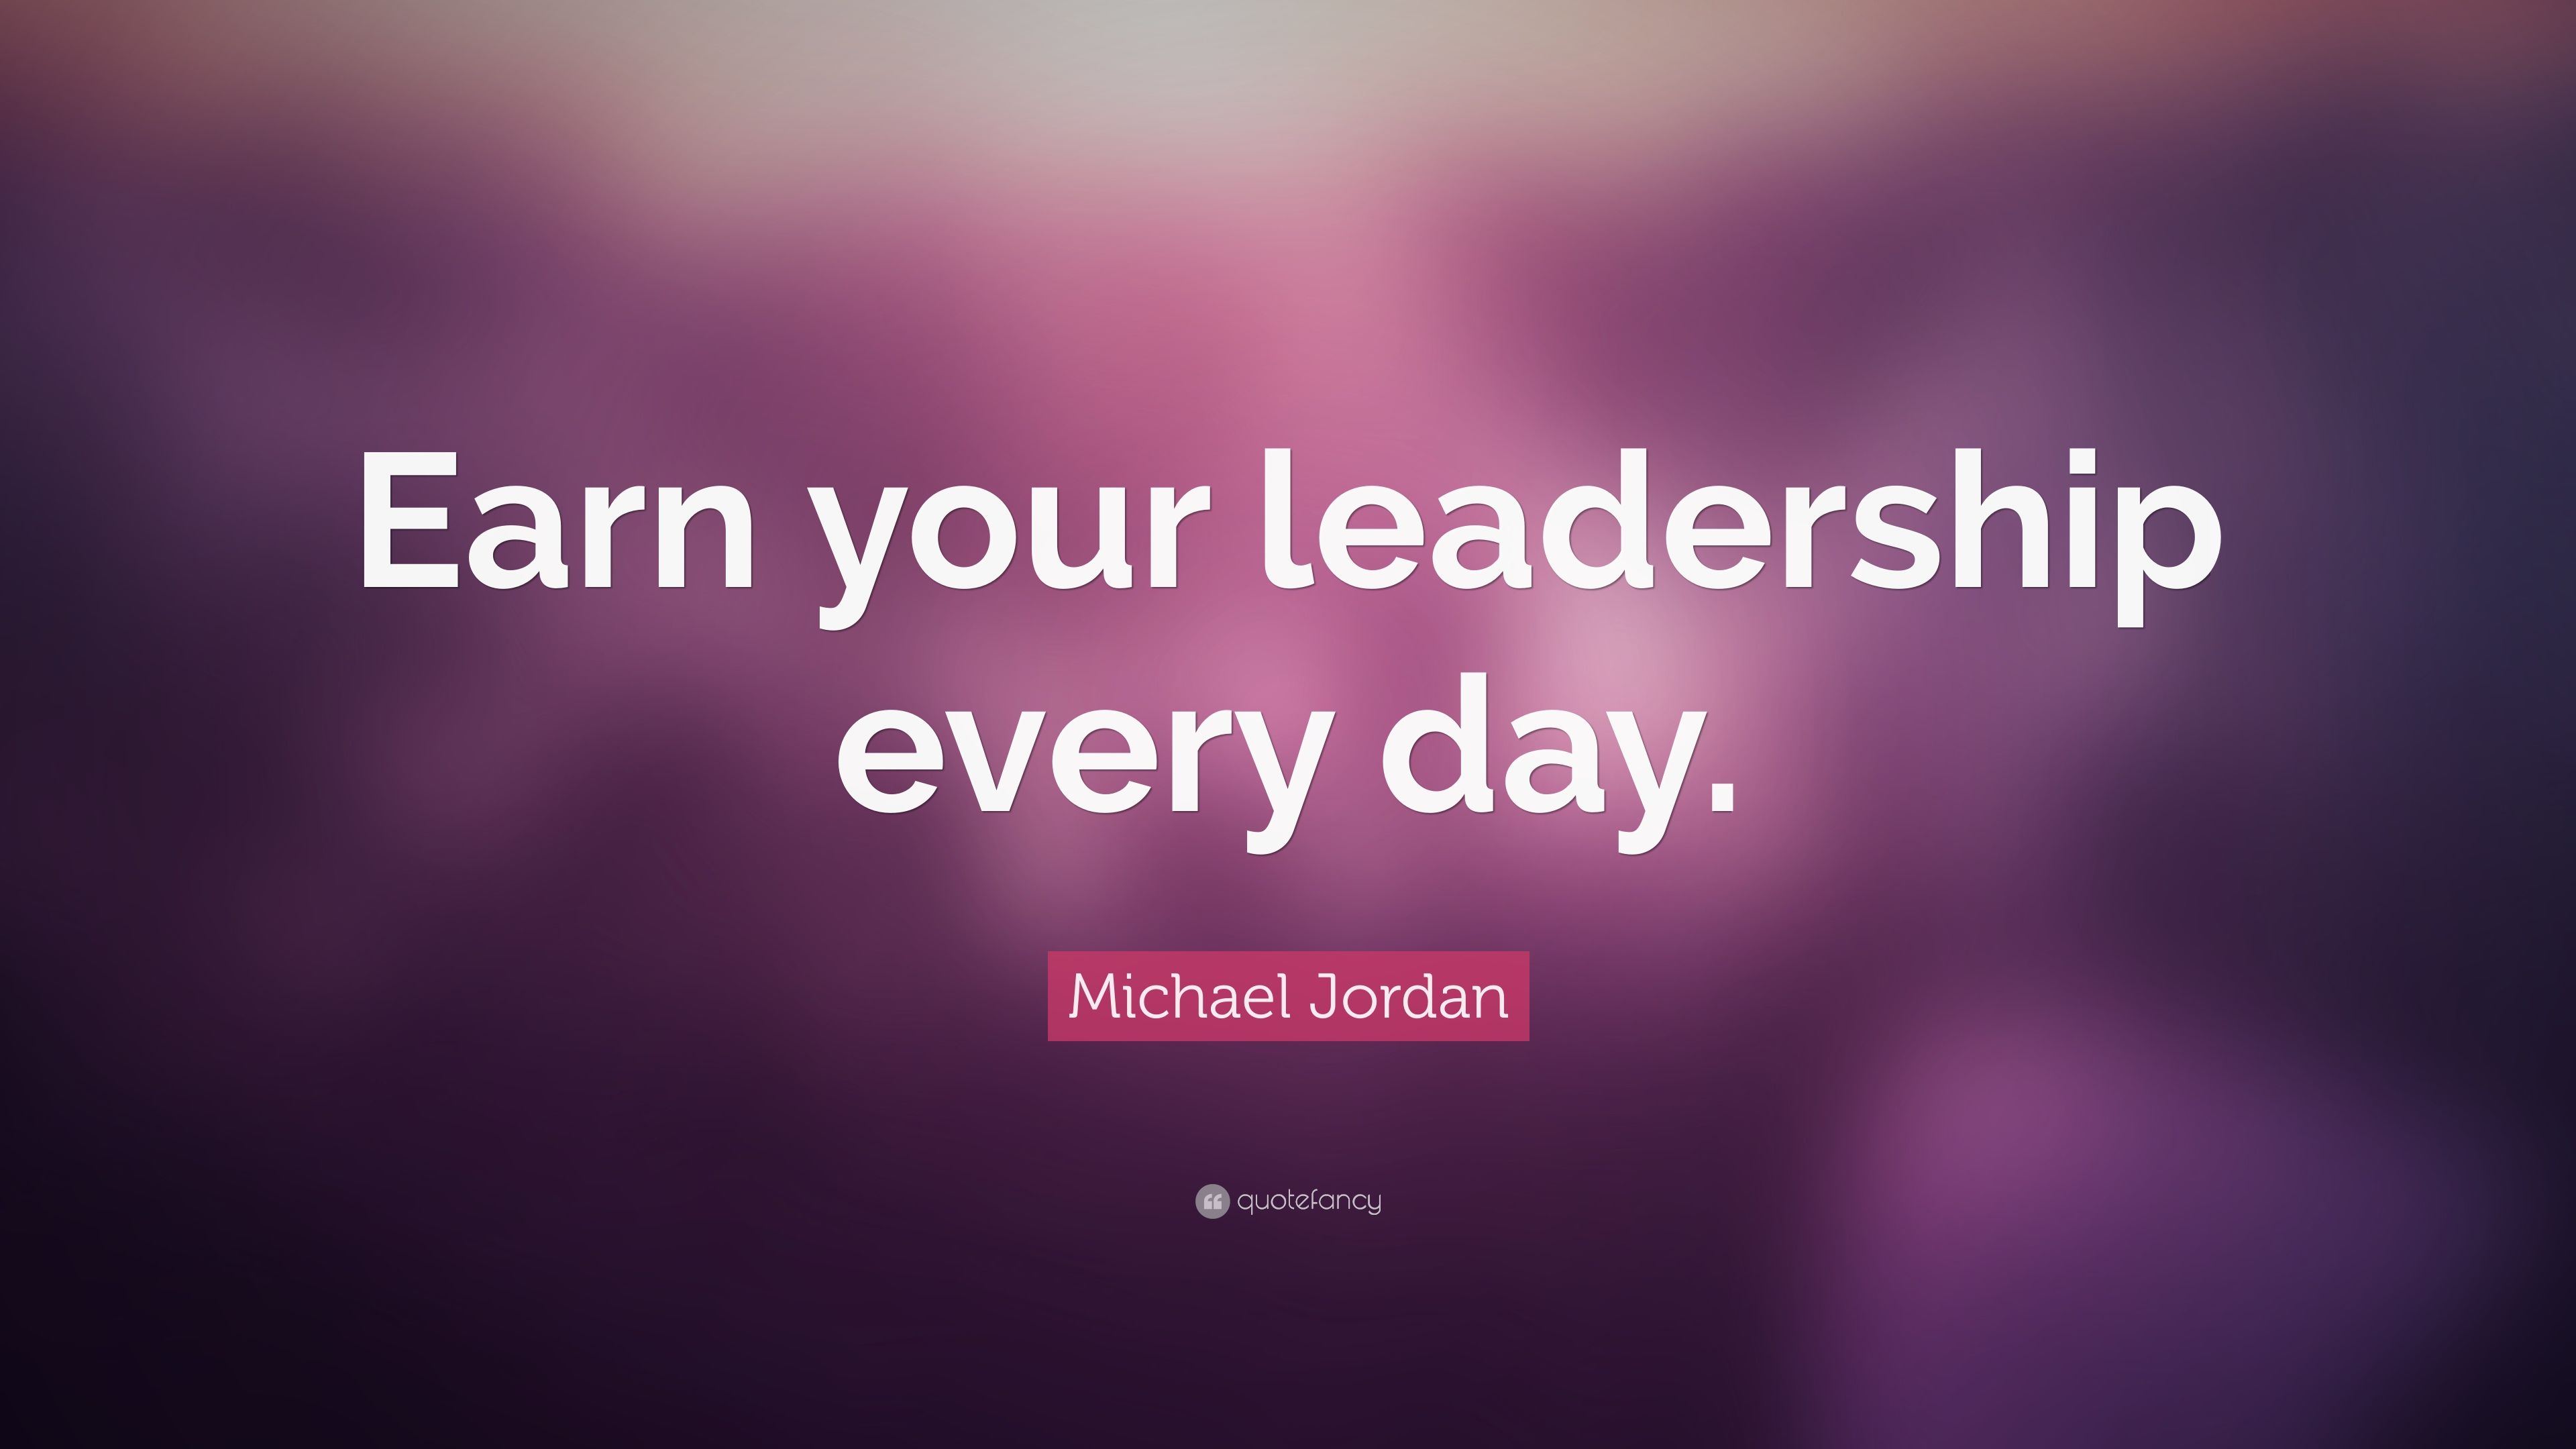 Michael Jordan Quote: “Earn your leadership every day.” (23 wallpaper)